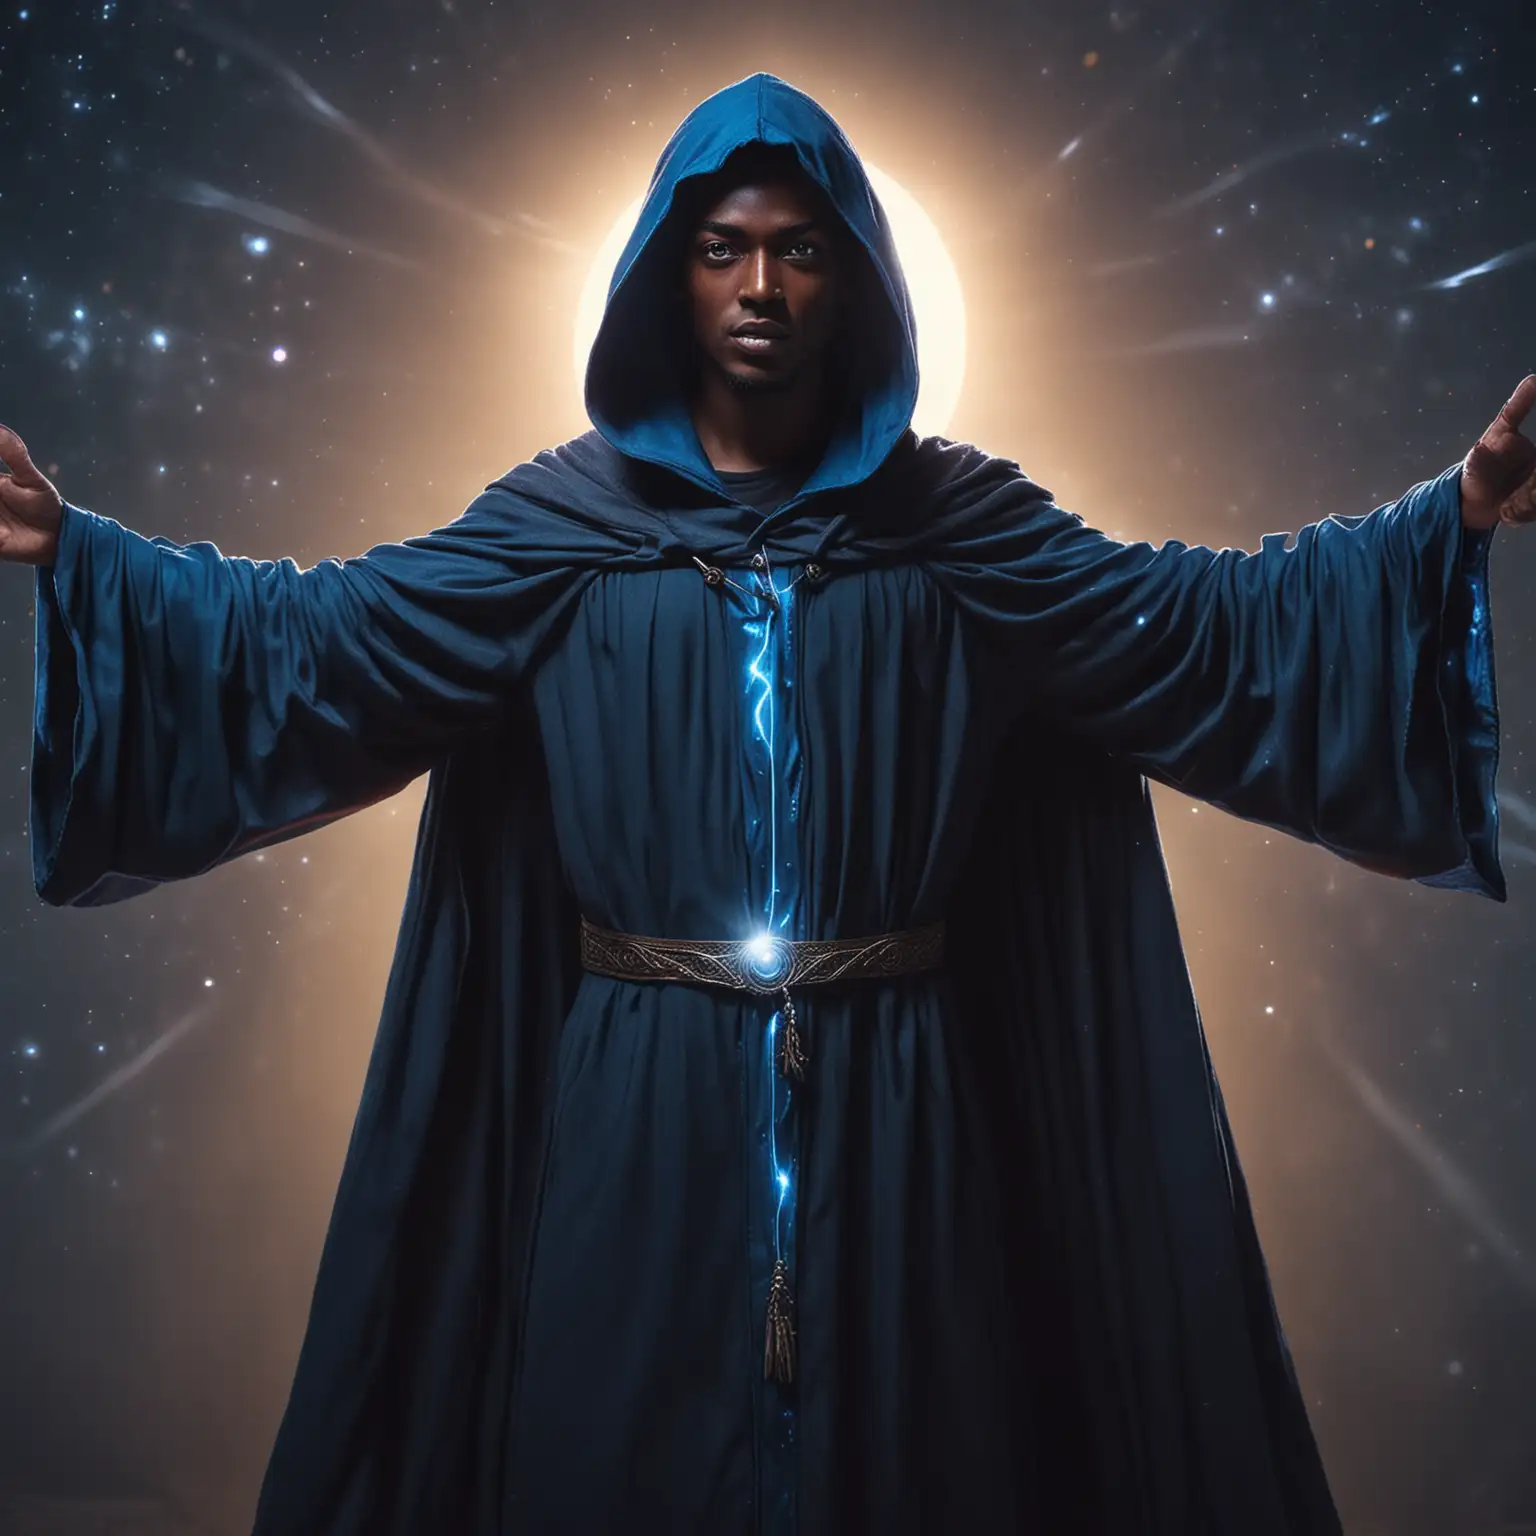 Celestial Dark Skinned Galactic Being in Blue Wizard Robe with Outstretched Arms and Bright Sun